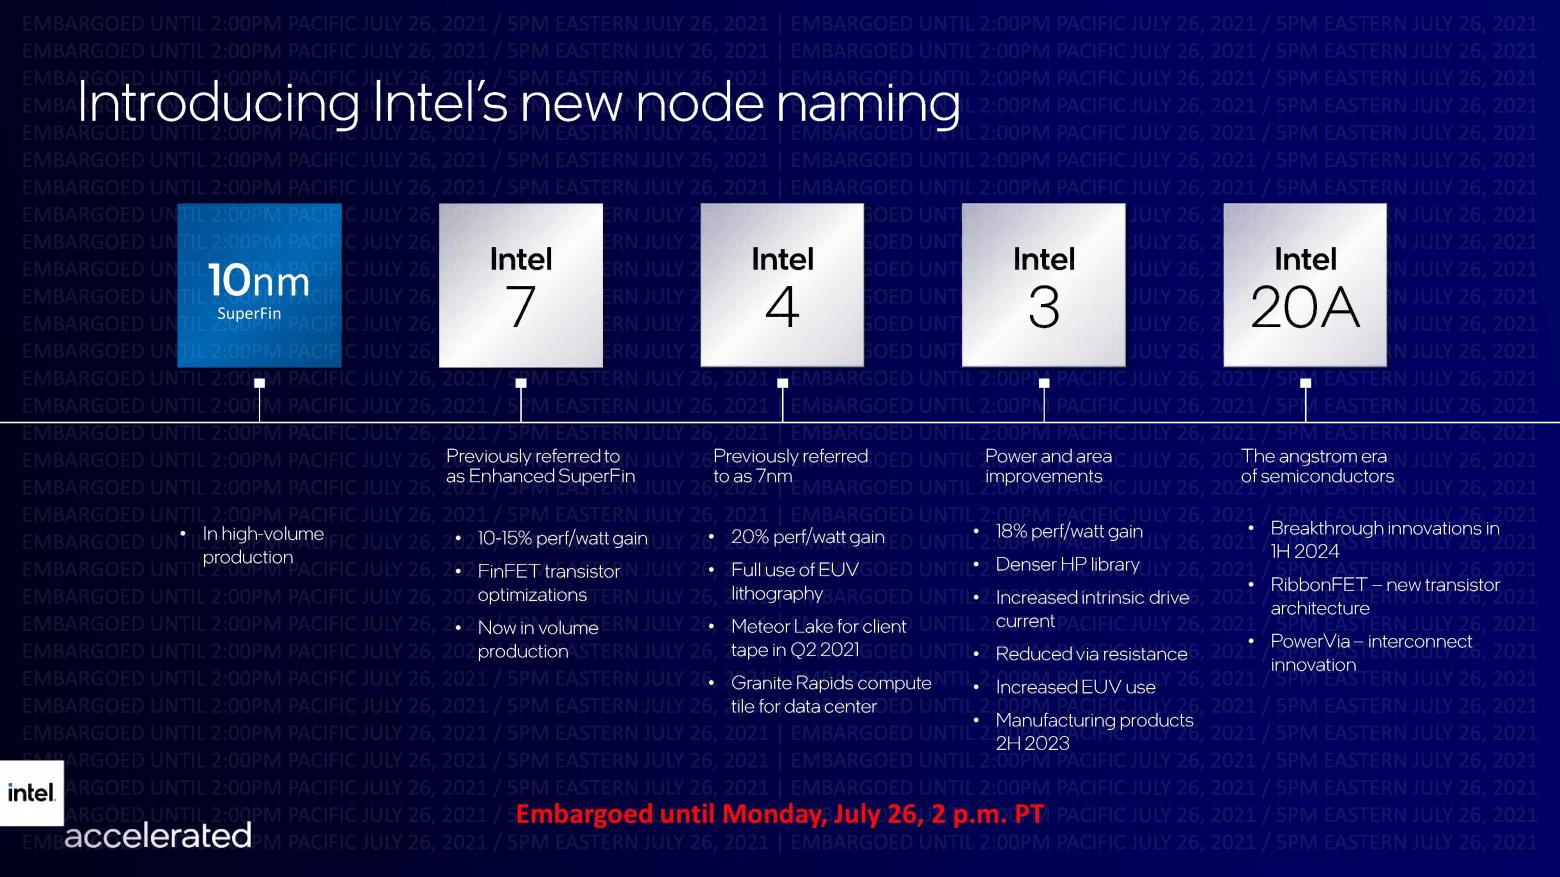 14th generation of Intel CPUs, Meteor Lake, is likely to be only mobile